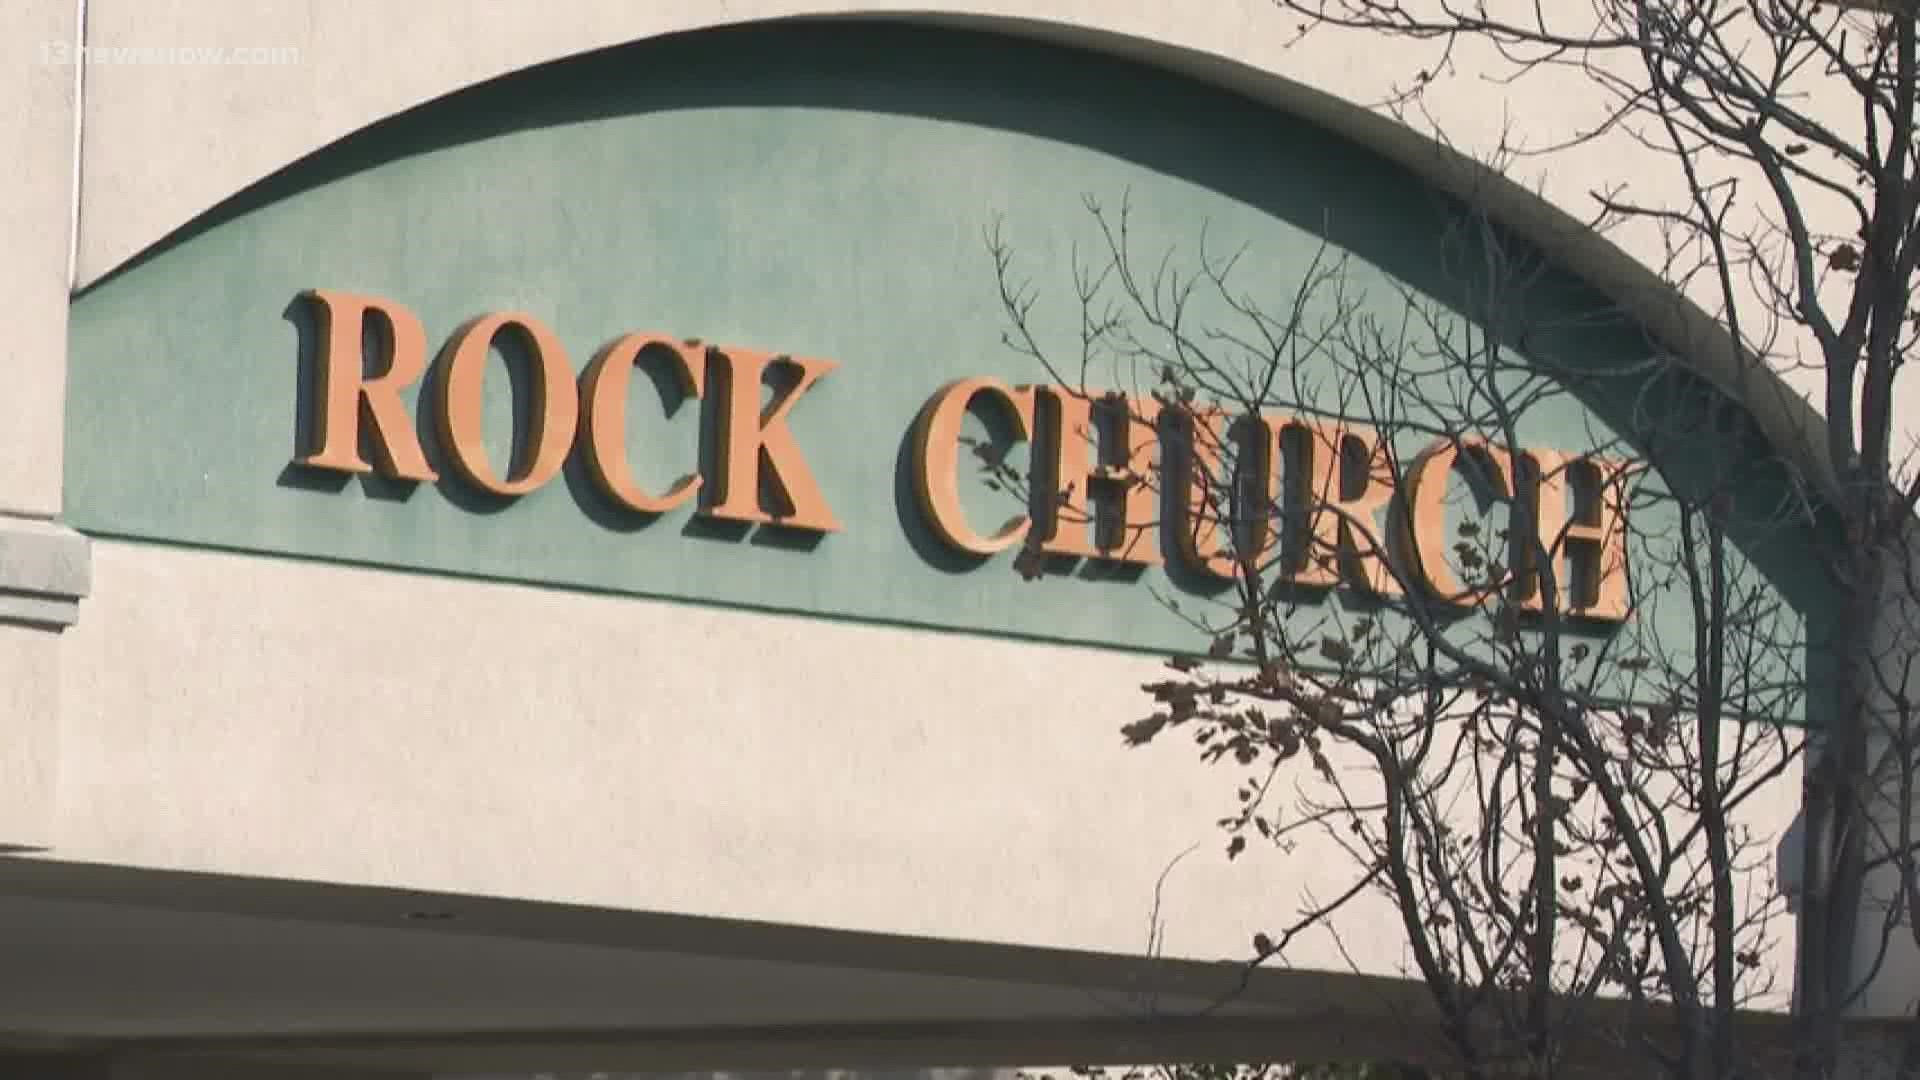 A judge in Chesterfield County said that John Blanchard of Rock Church International can travel outside of the state for business.